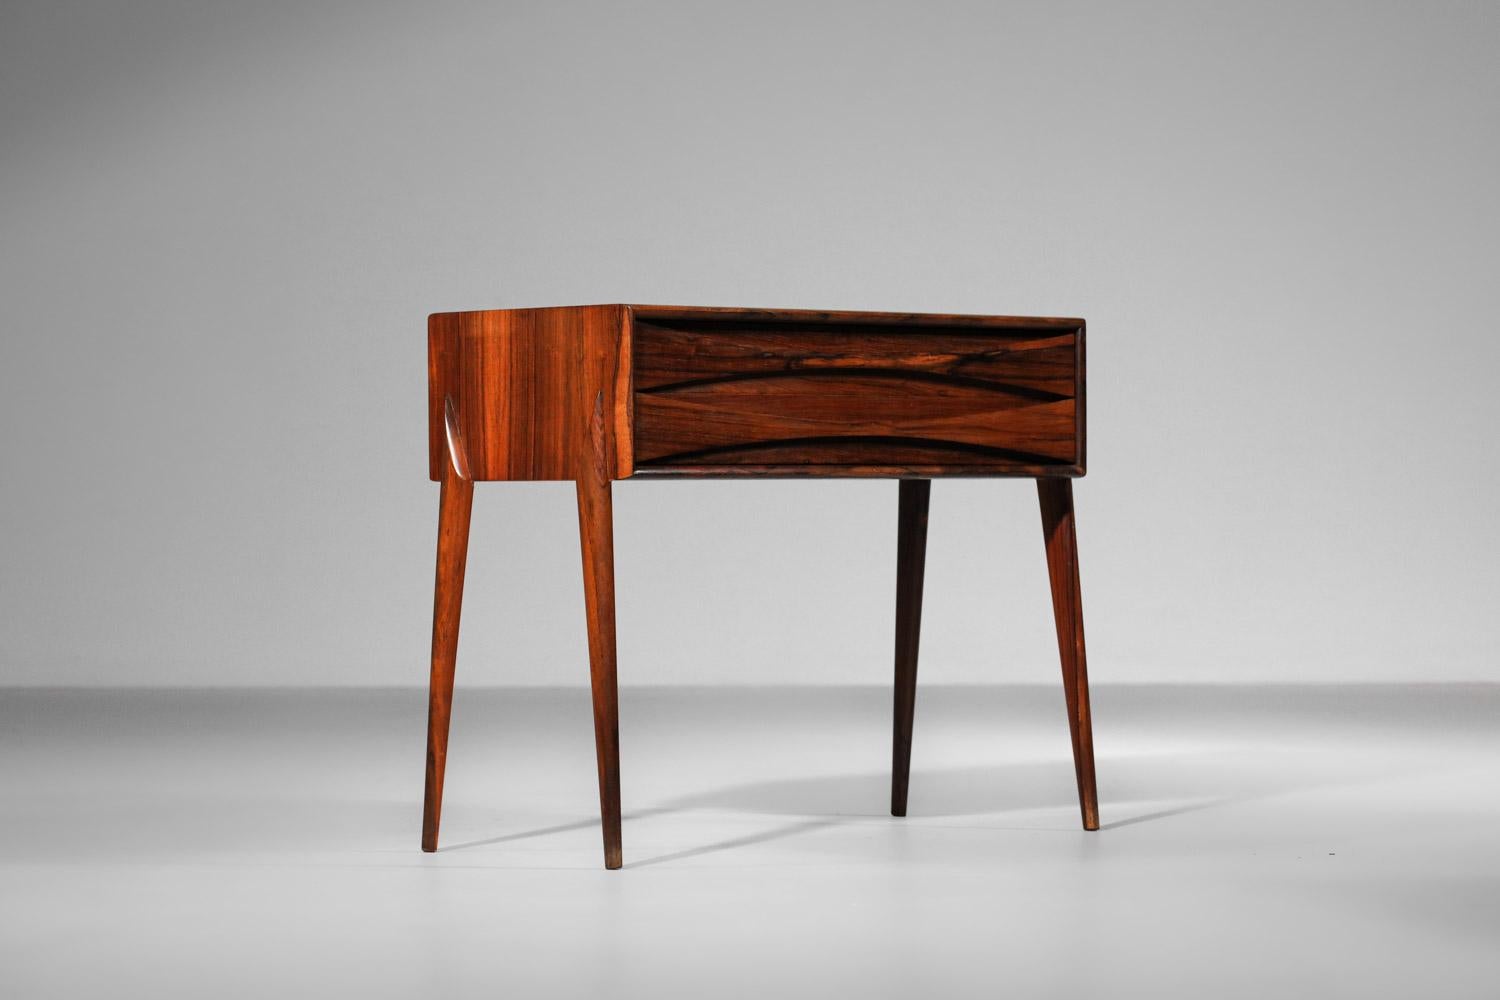 Bedside table from the 60s by Danish designer Arne Vodder. This bedside table is entirely in solid Rio rosewood and veneered. The two drawers are beautifully finished with full-length wooden handles. Sober, uncluttered design typical of Scandinavian